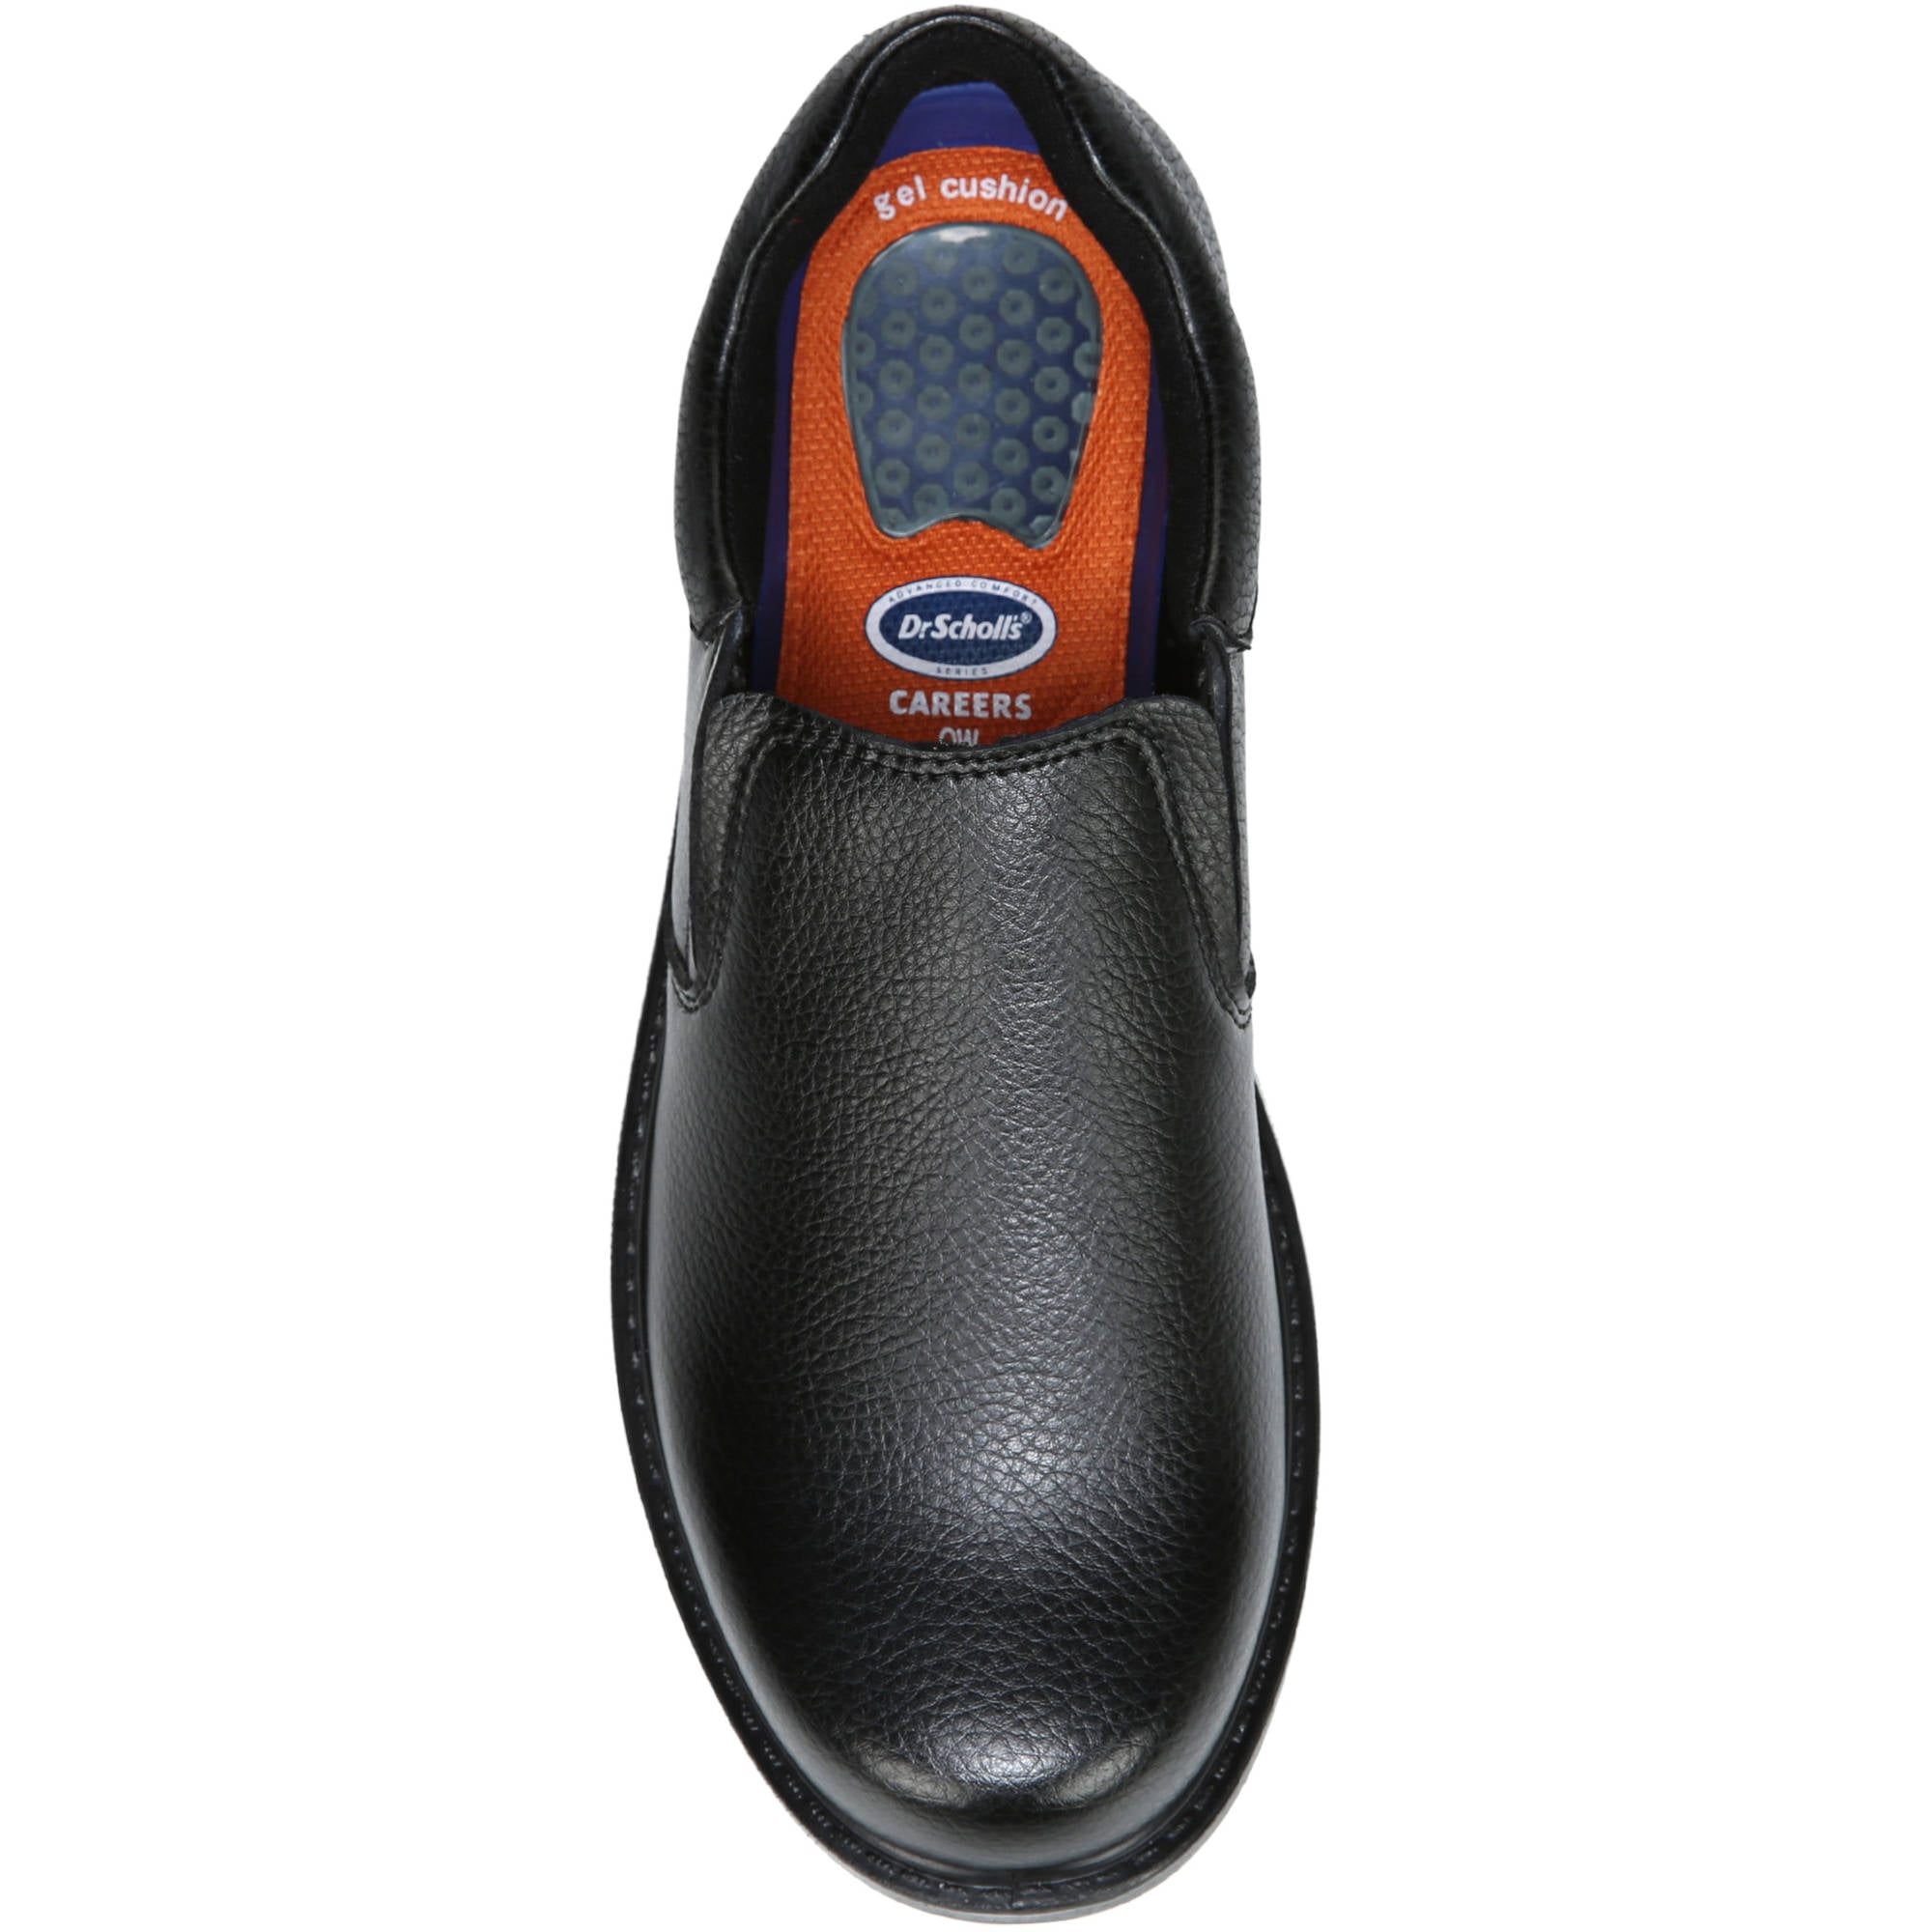 dr scholl's careers slip resistant shoes